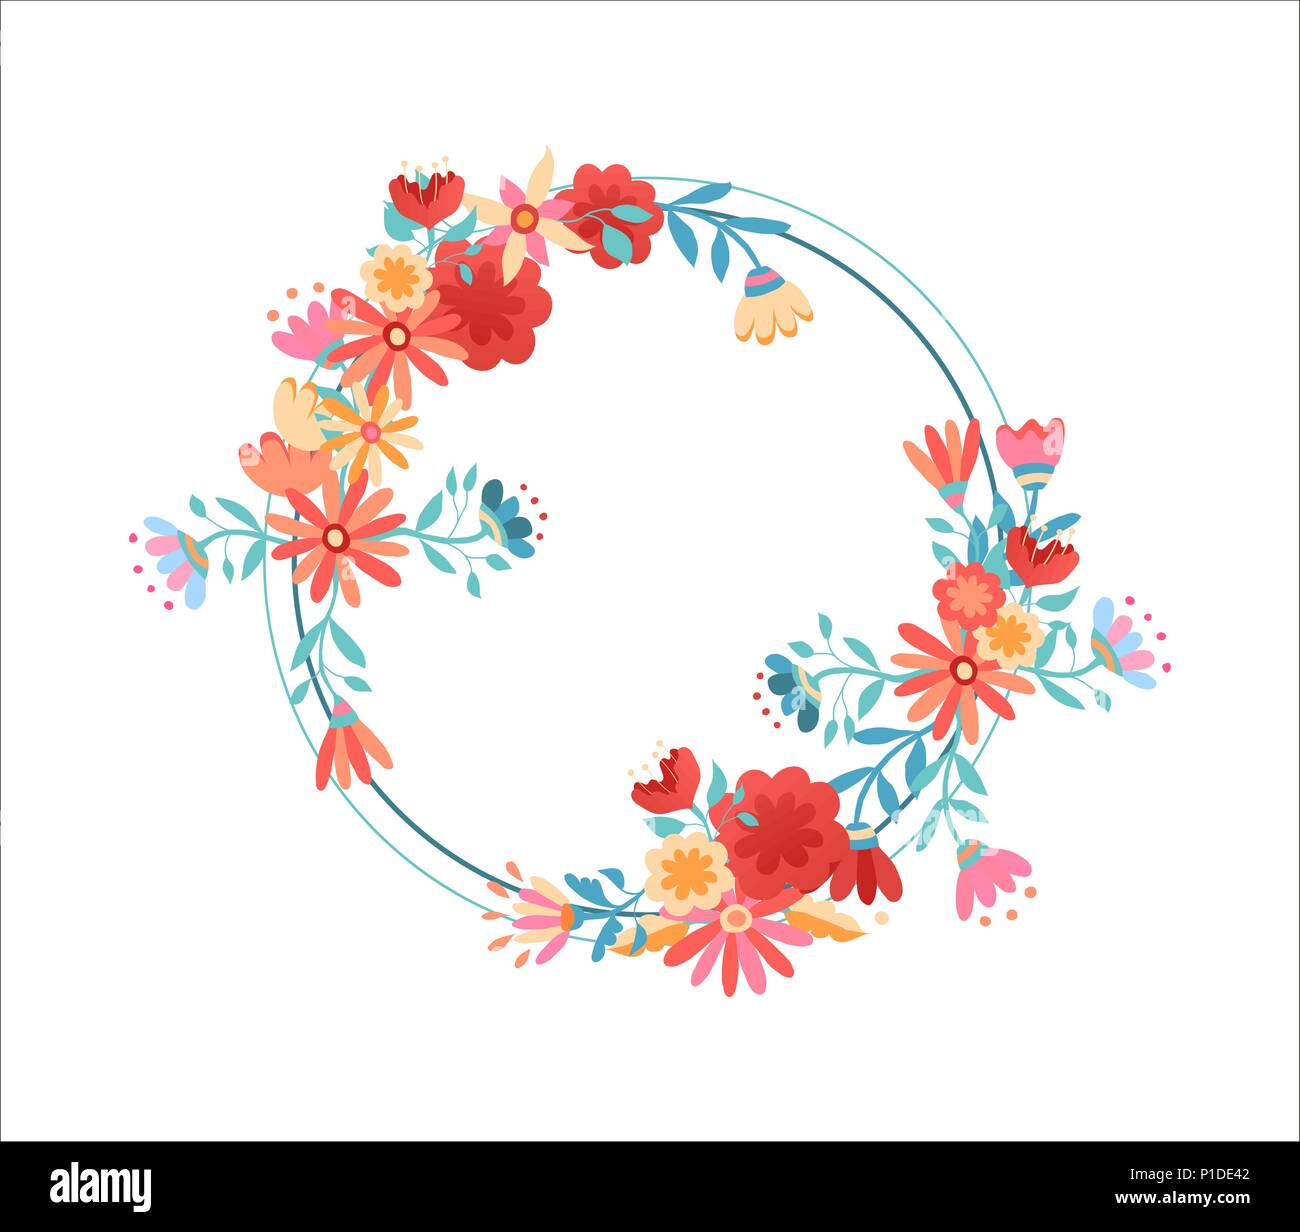 Flower wreath illustration on isolated background. Hand drawn daisy and rose floral frame with copy space. EPS10 vector. Stock Vector